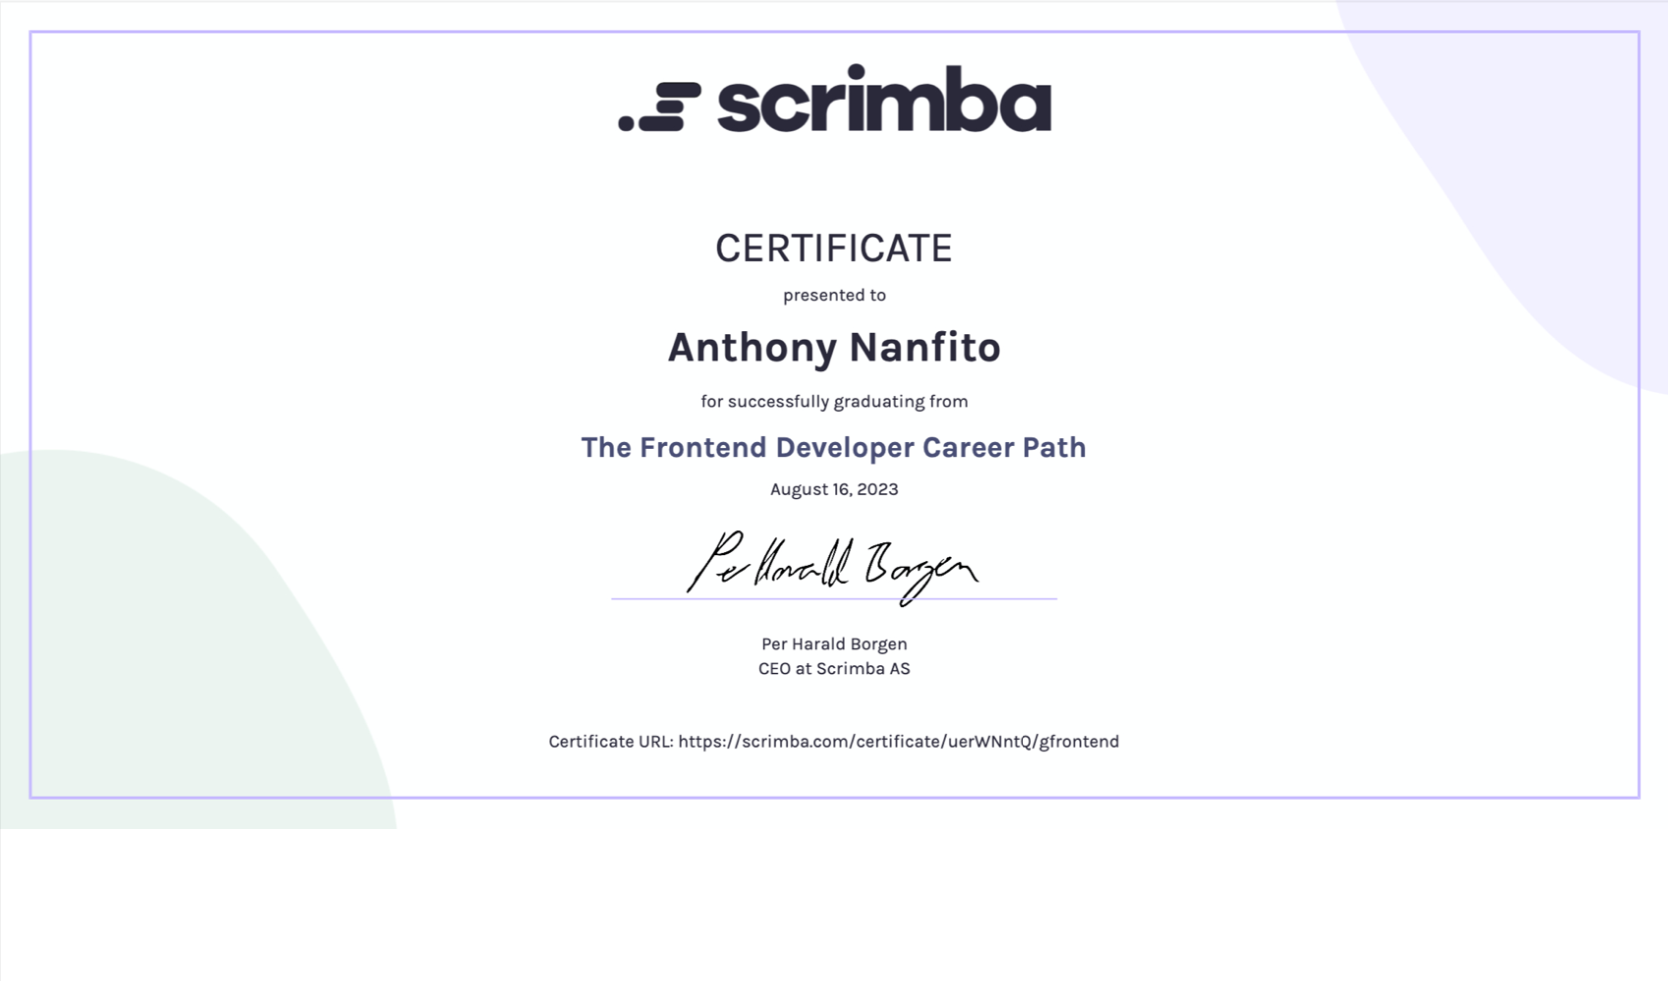 Scrimba certificate of completion for the Frontend Developer Career Path